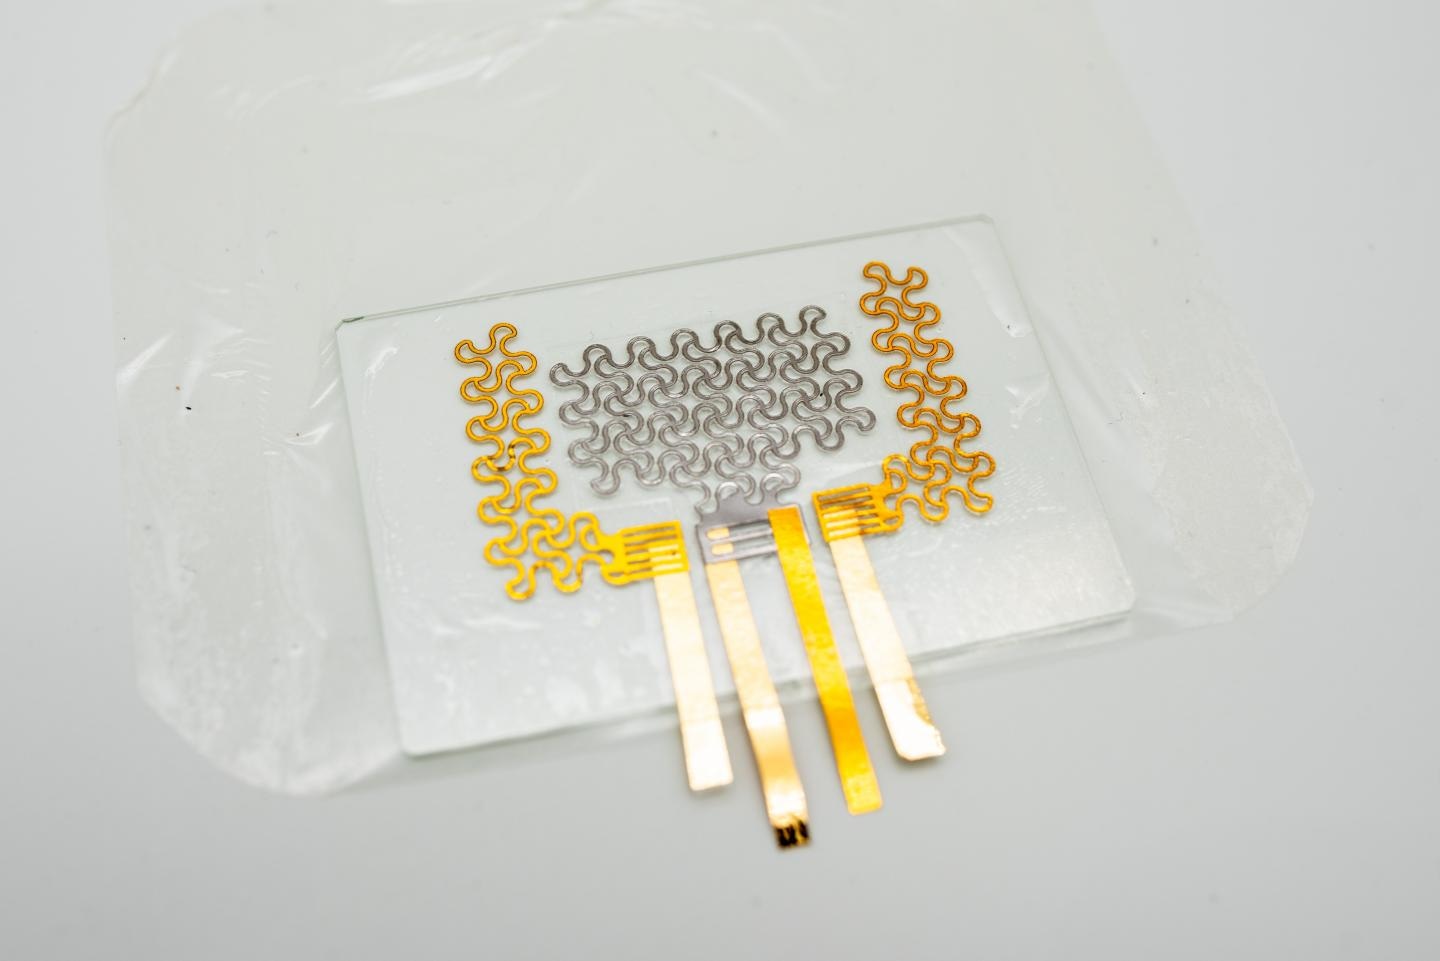 Stretchable e-tattoo enables heart monitoring for days.